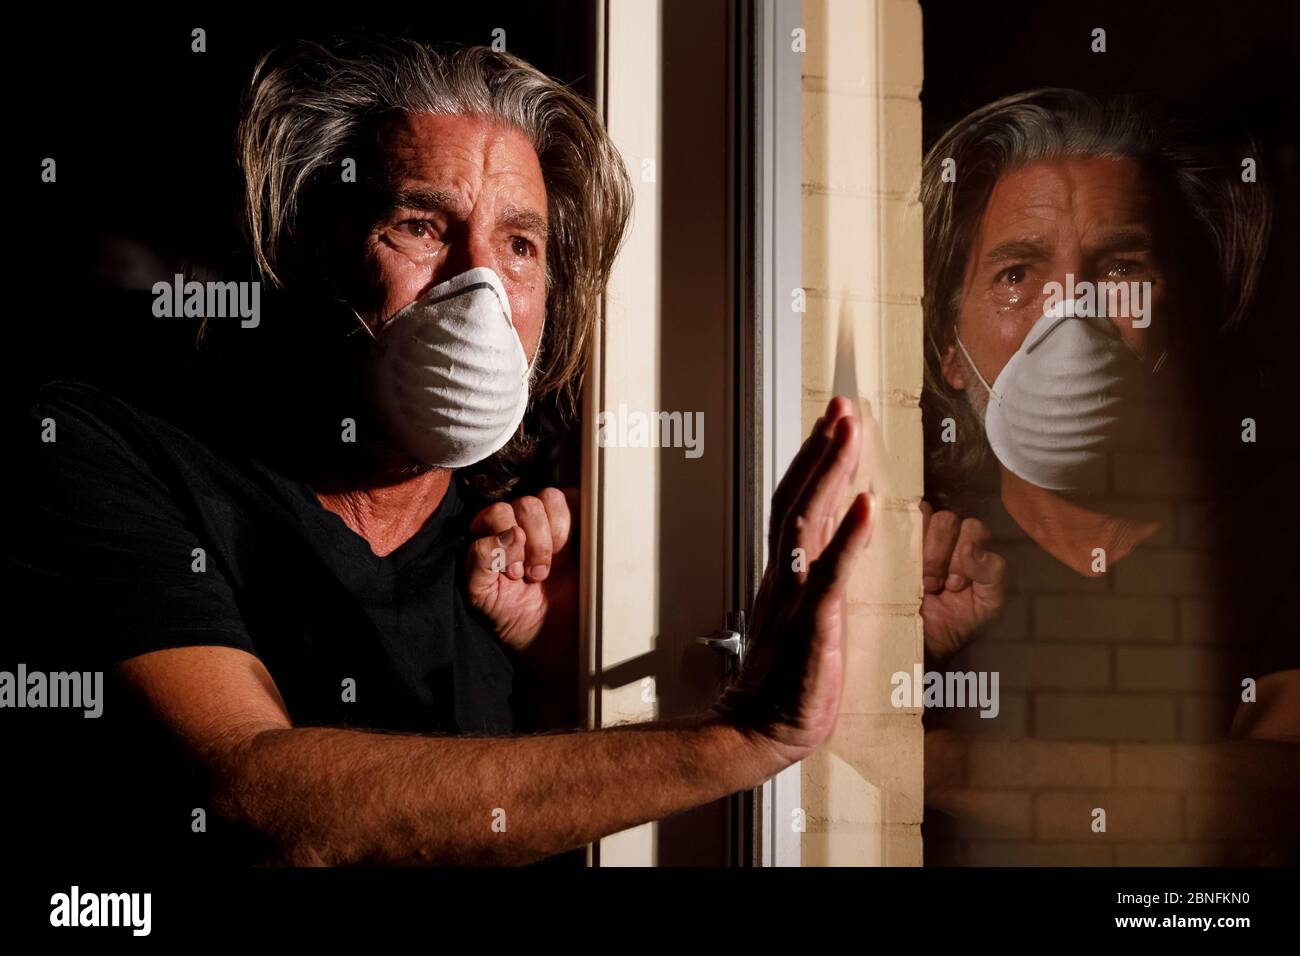 coronavirus crying male medical mask quarantine, self isolation concept, depressed distraught mans reflection in window with tears wearing protective Stock Photo